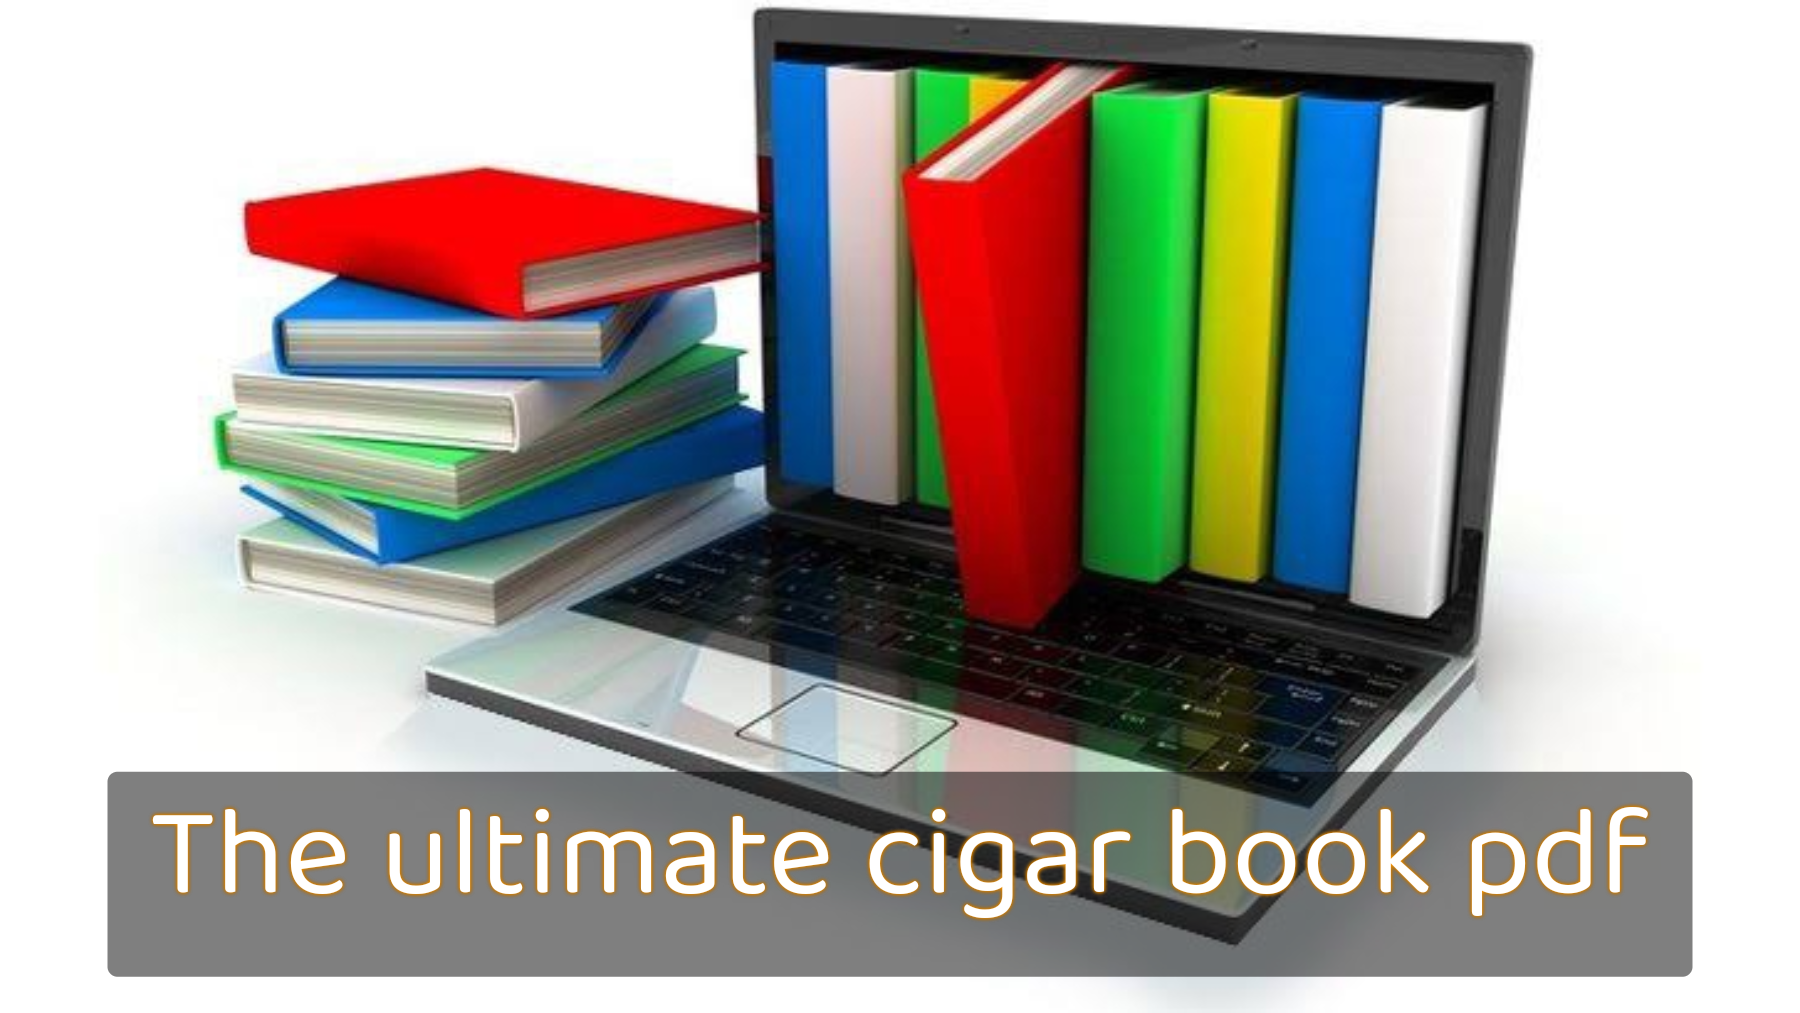 The ultimate cigar book pdf, The ultimate audition, The ultimate iq test book, The ultimate cigar book pdf download